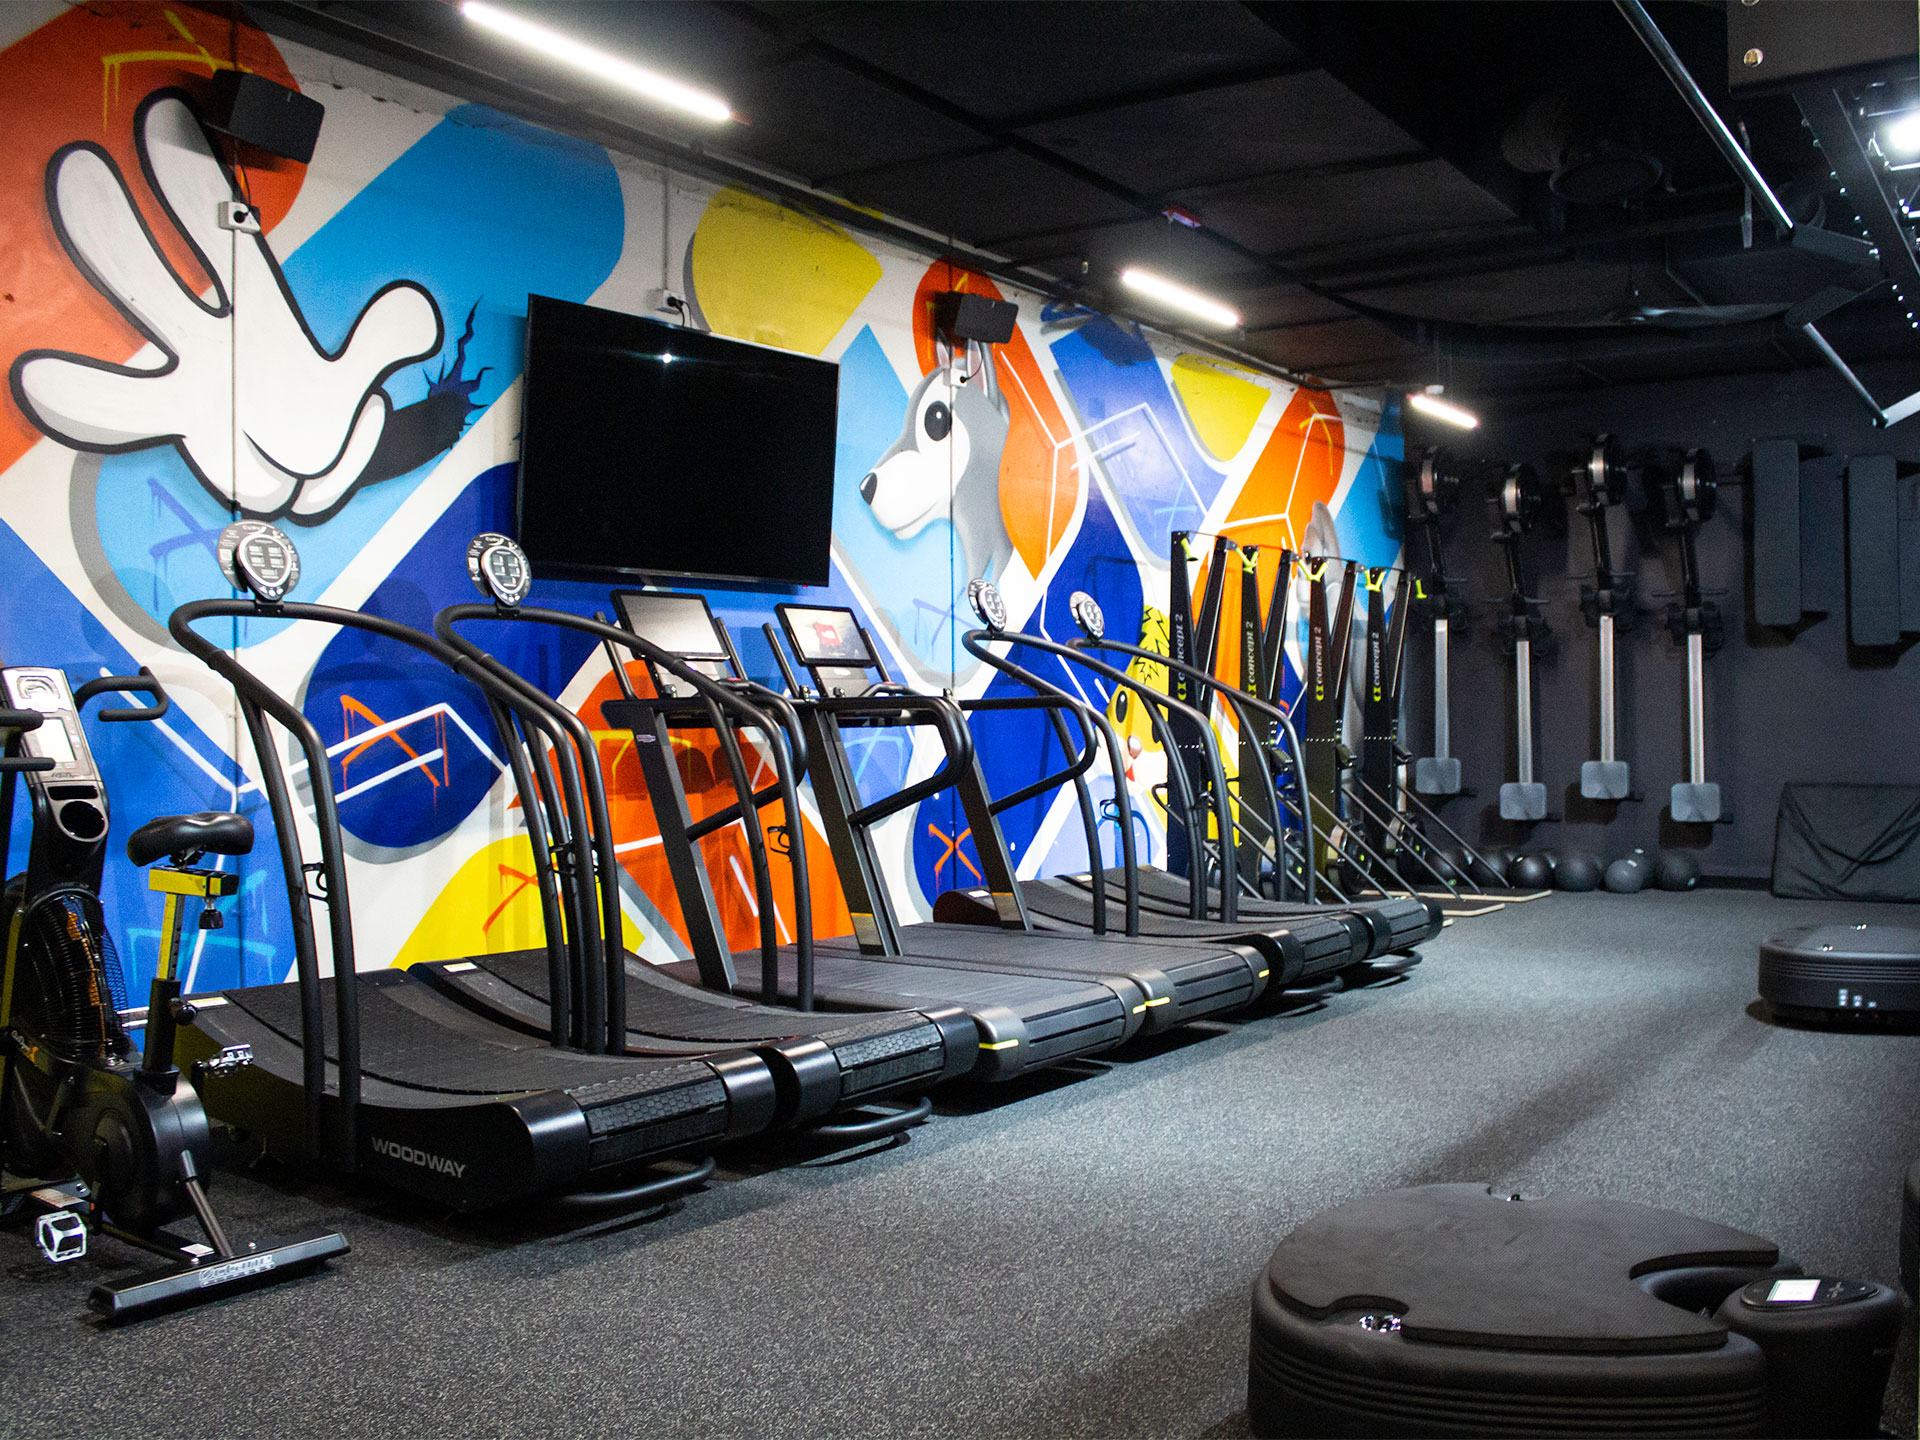 Ion Strength and Conditioning Gym Fitout